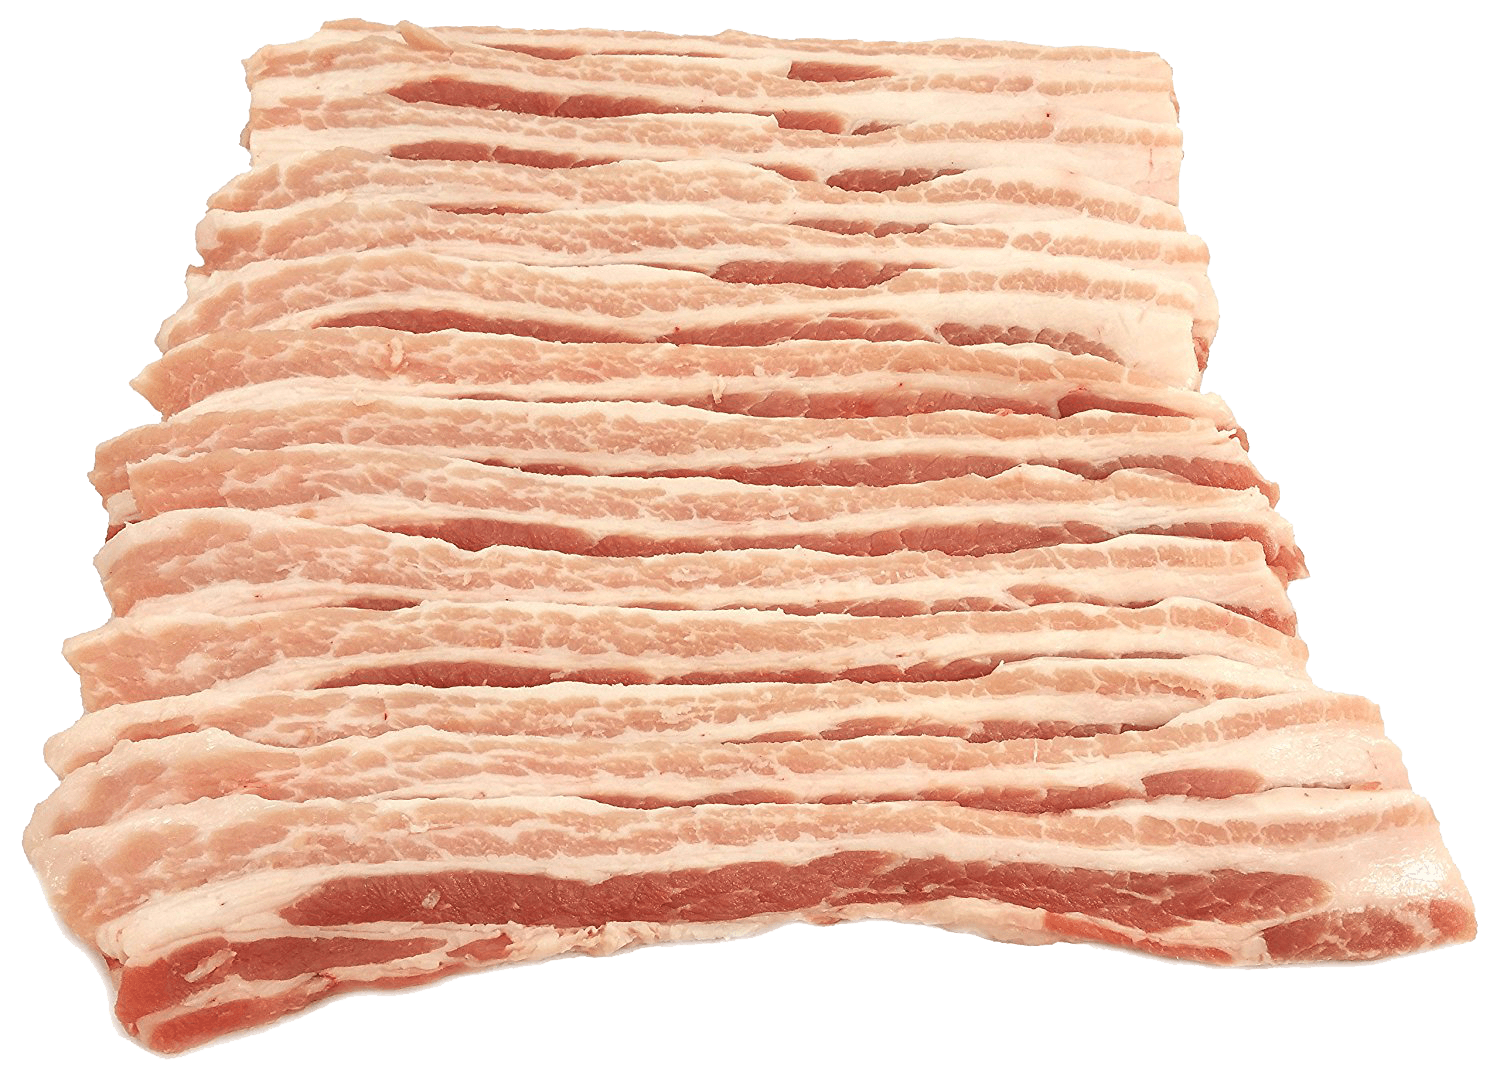 Fresh Local Meat Delivery - Frank And Sal Fresh Cut Sliced Pork Belly (Pancetta) 2 Pounds